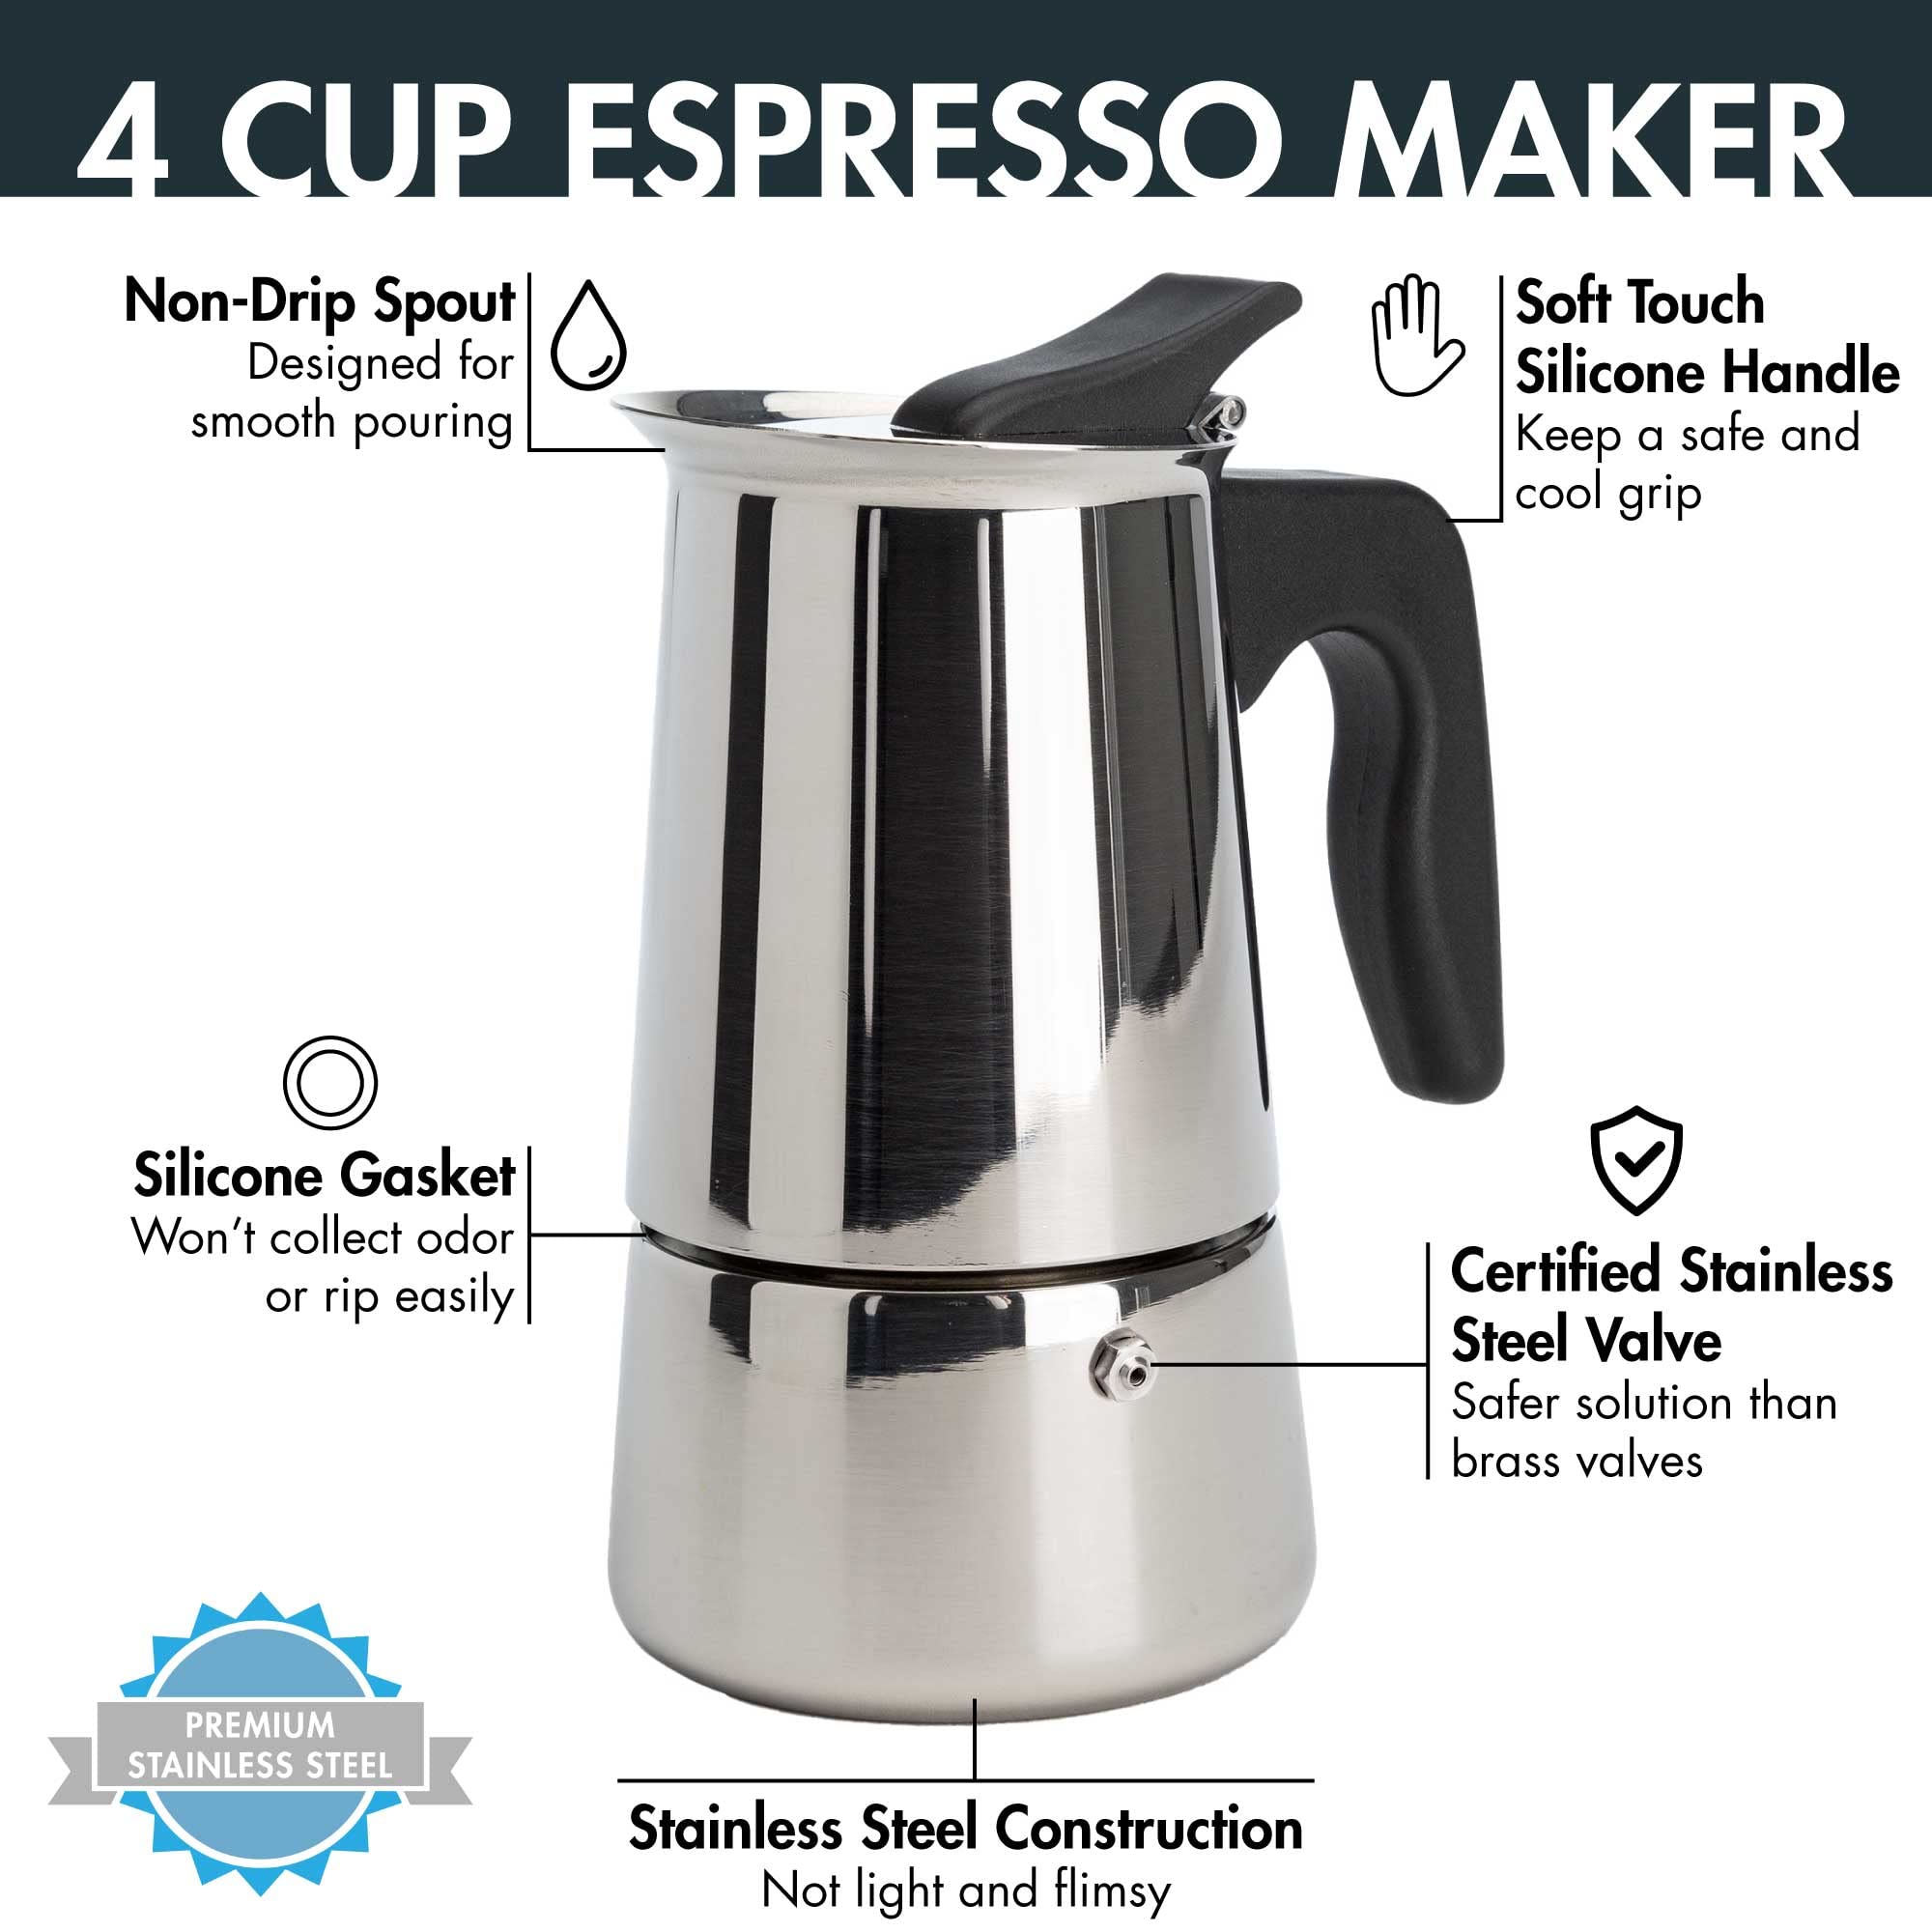 Primula Stainless Steel Stovetop Espresso Coffee Maker, 4-Cup, 3.5"D x 5"W x 7"H, Black Handle